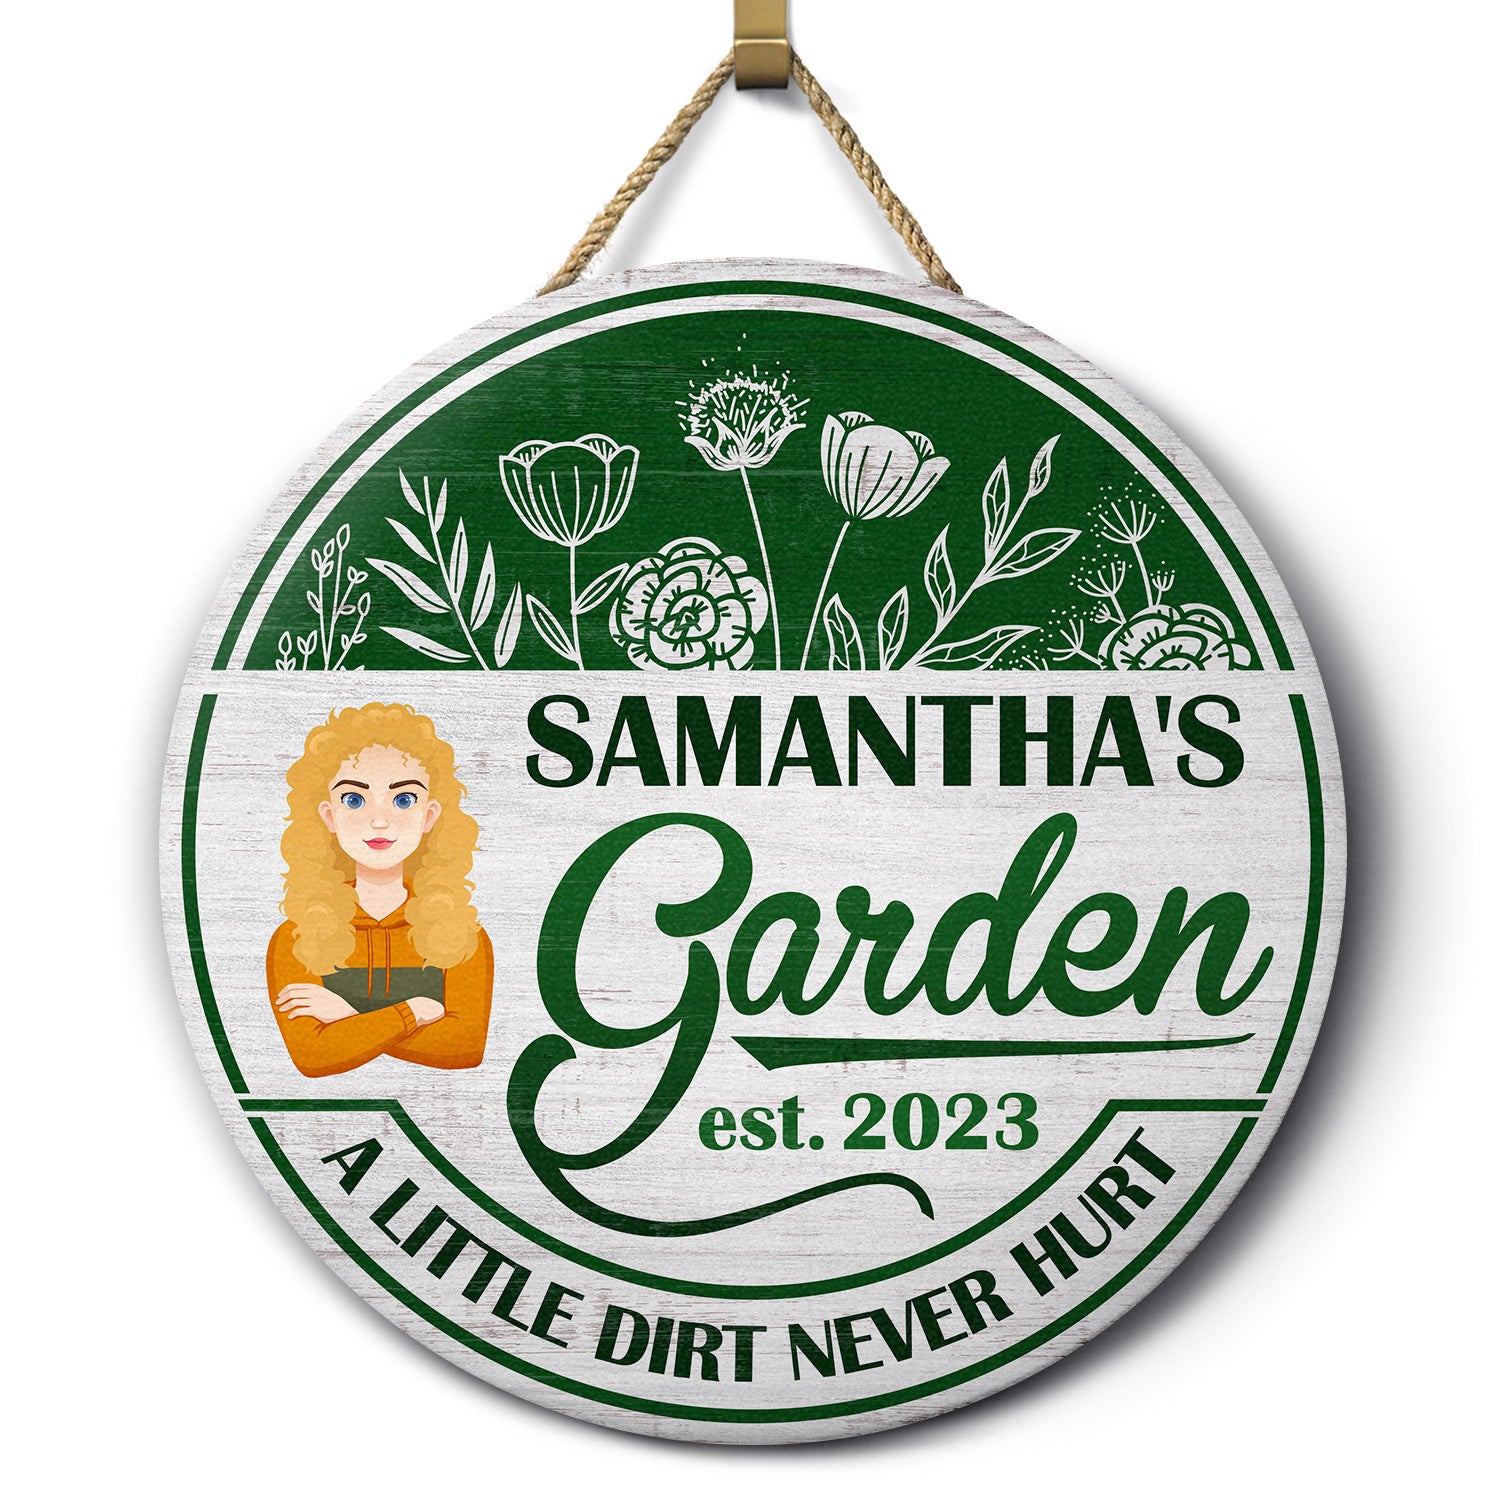 A Little Dirt Never Hurt - Garden Decoration - Personalized Wood Circle Sign